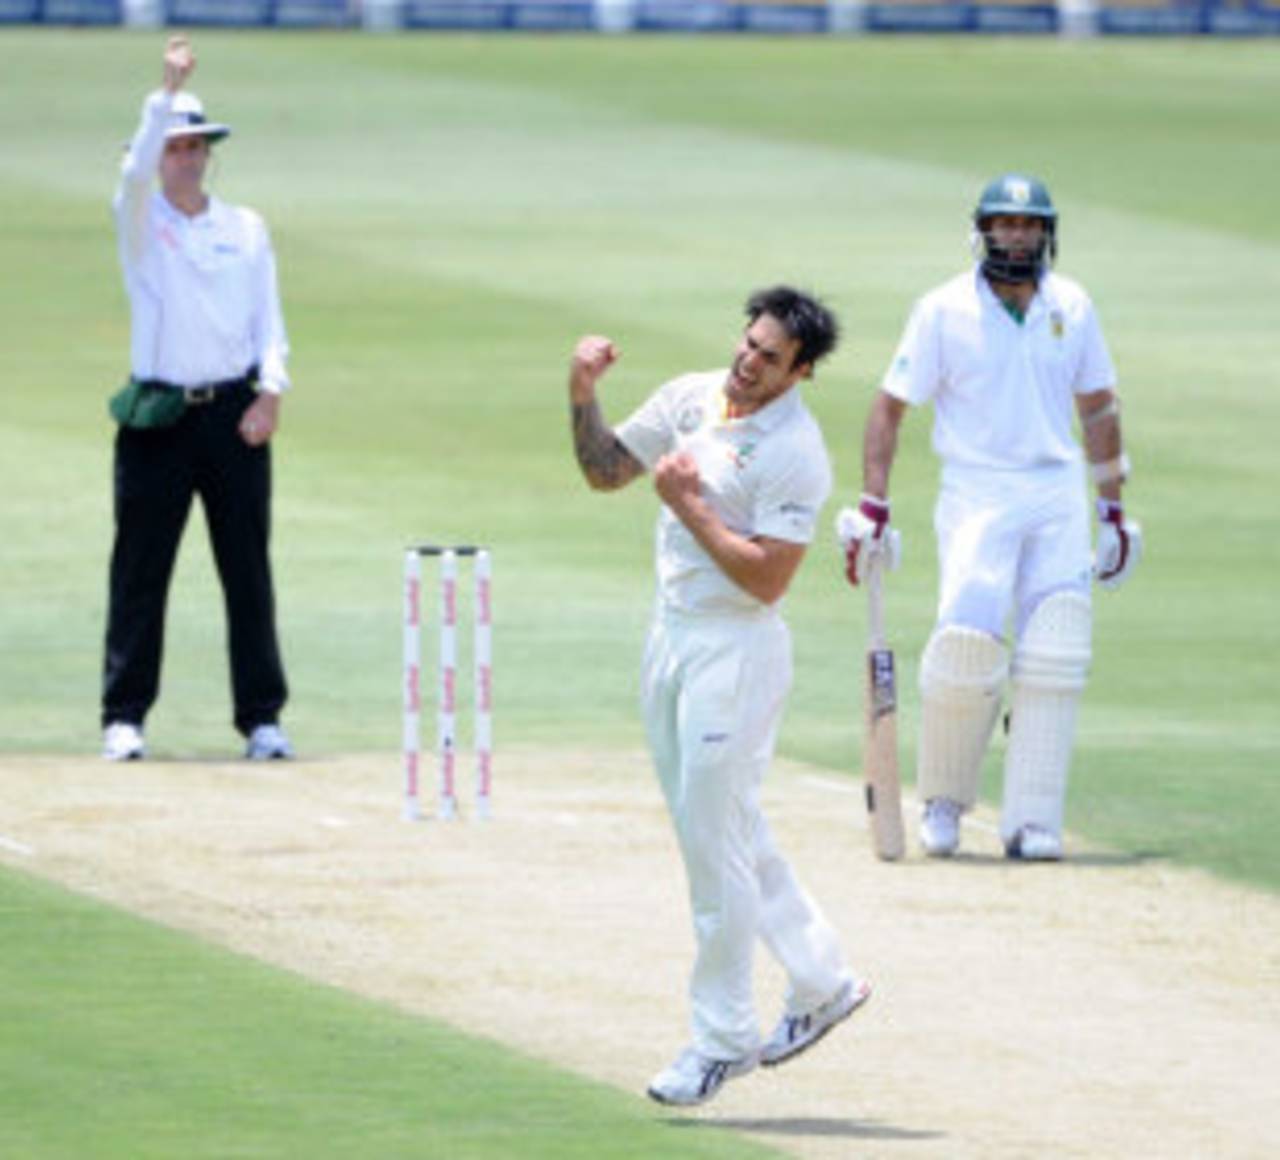 Mitchell Johnson thinks he has dismissed Jacques Kallis but the decision was reversed after a review, South Africa v Australia, 2nd Test, Johannesburg, 1st day, November 17, 2011